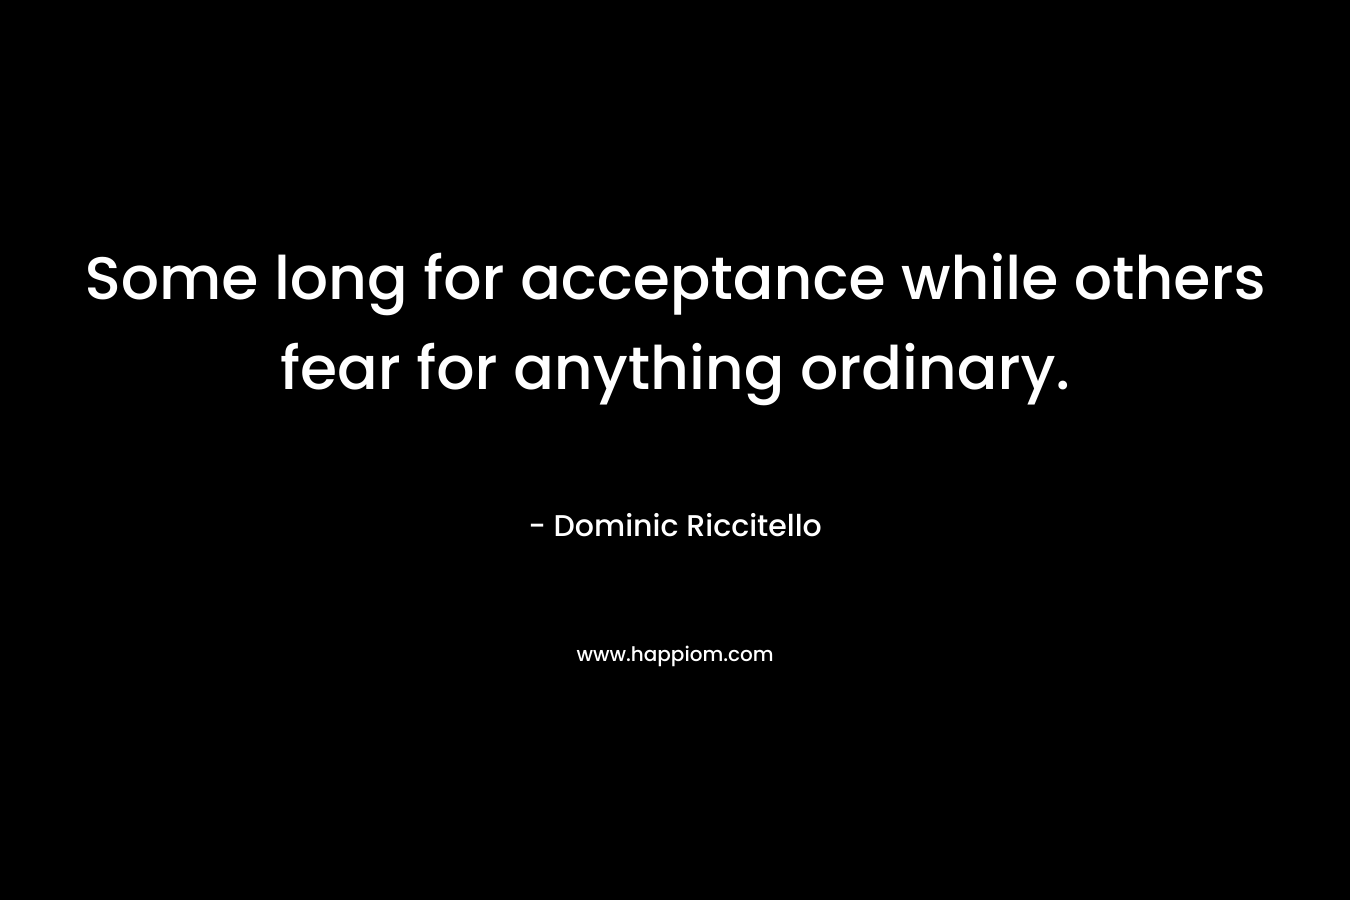 Some long for acceptance while others fear for anything ordinary.